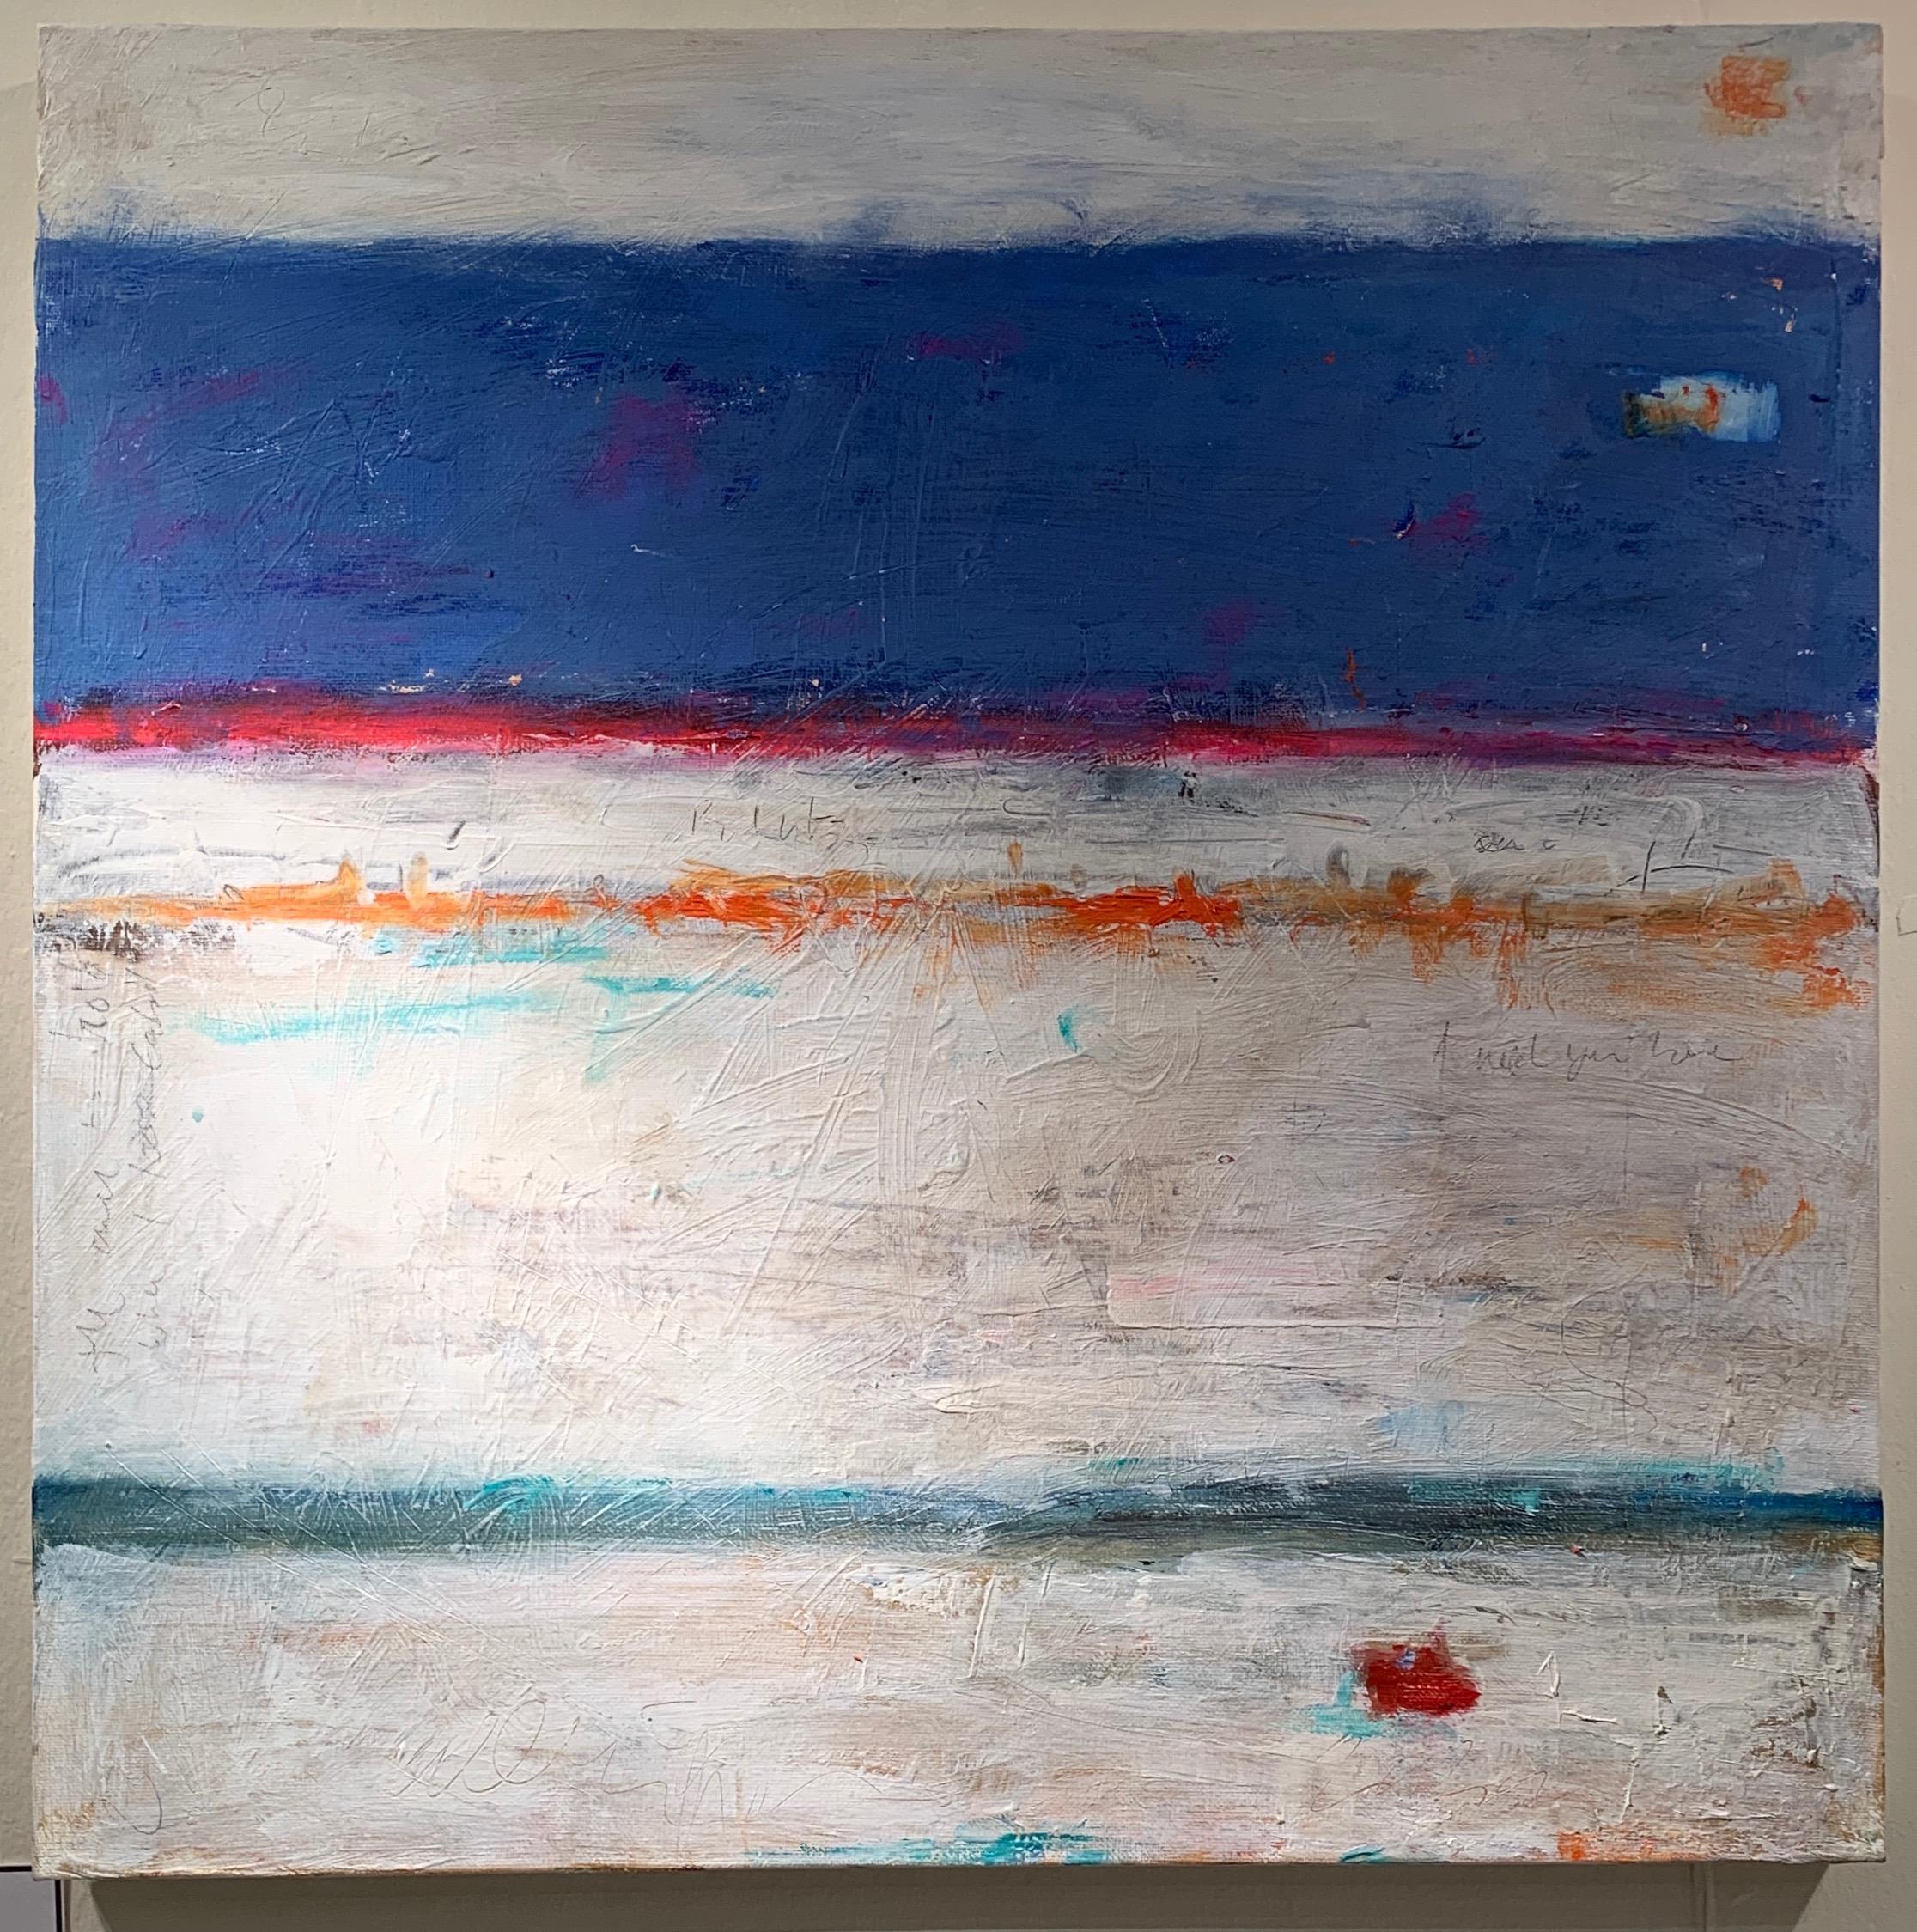 Abstract expressionist sea, shore, landscape scene with white, blue and orange